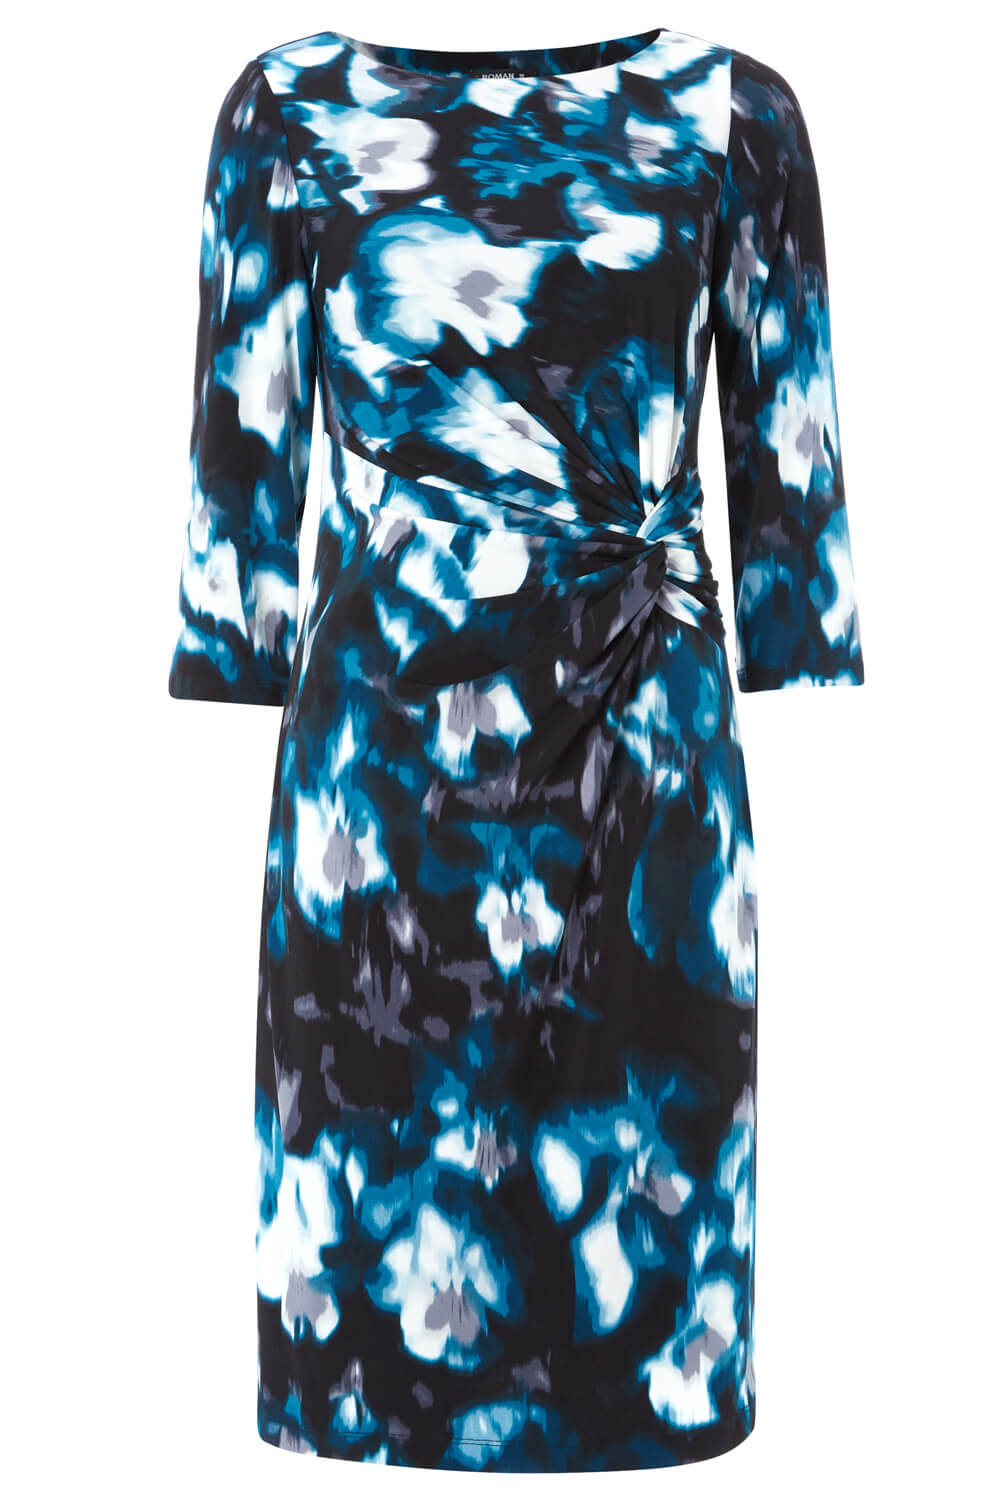 Petrol Blue Abstract Floral Twist Waist Dress, Image 4 of 4